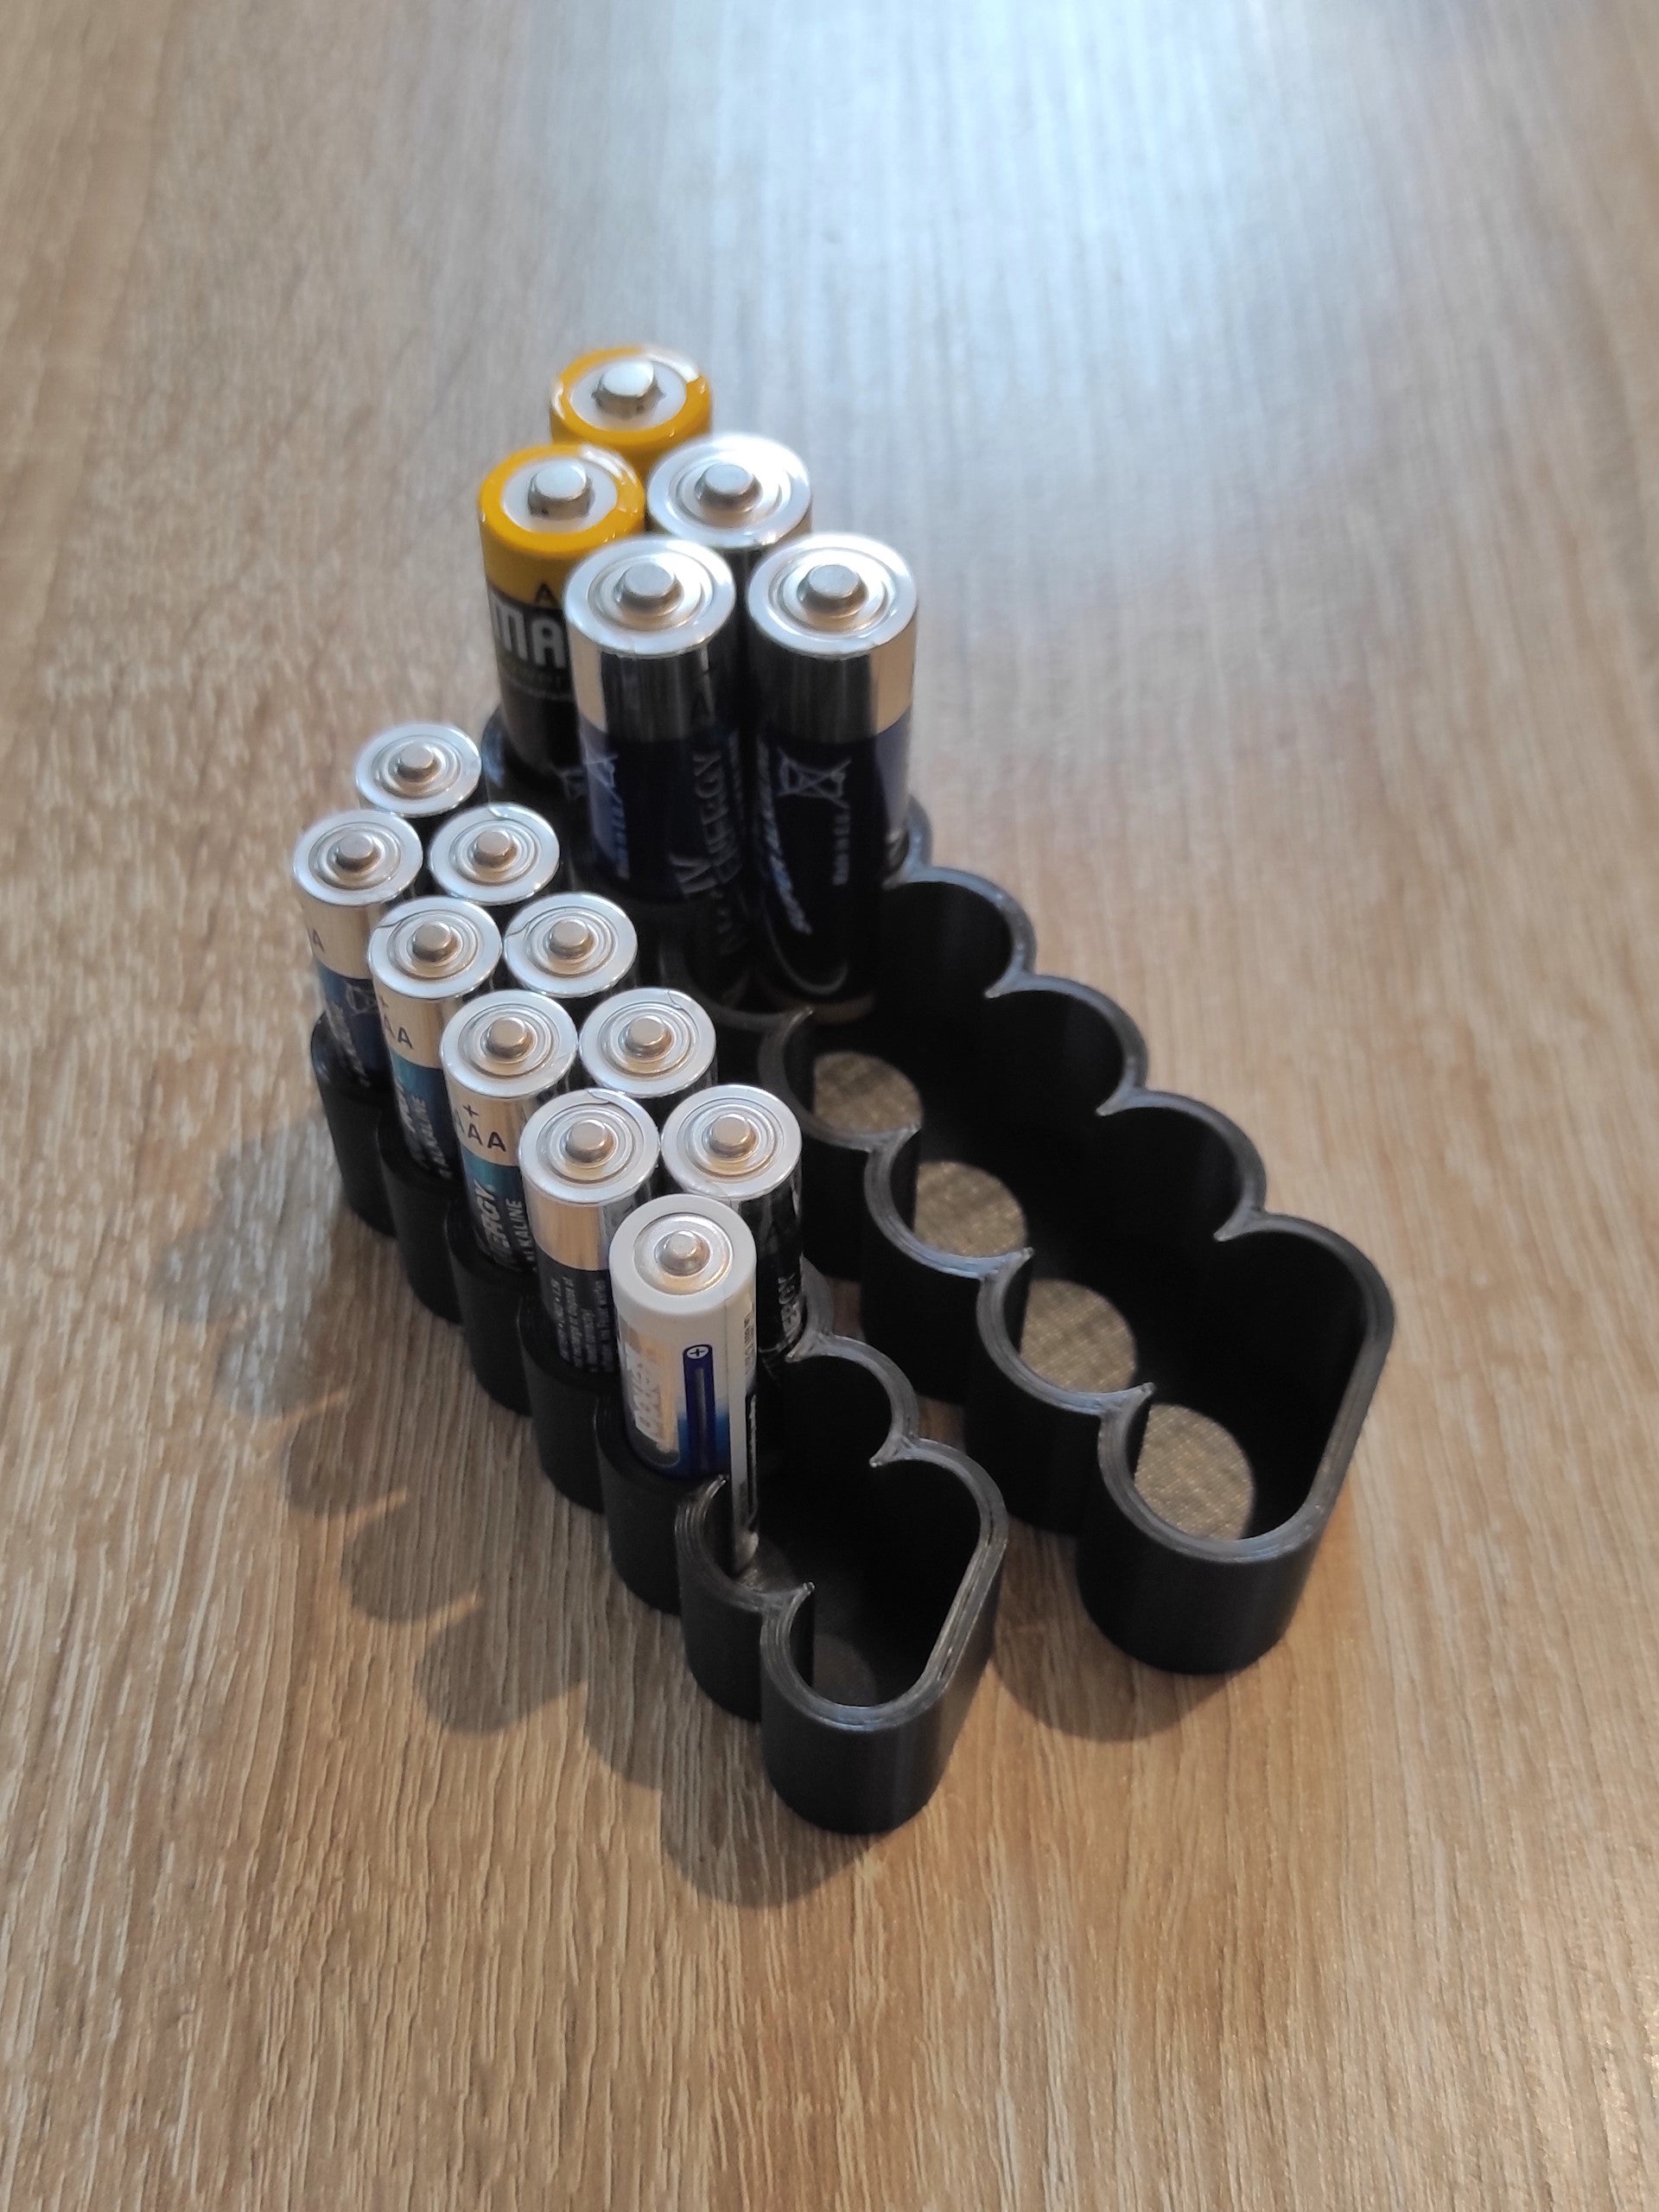 Battery holder for AA and AAA batteries